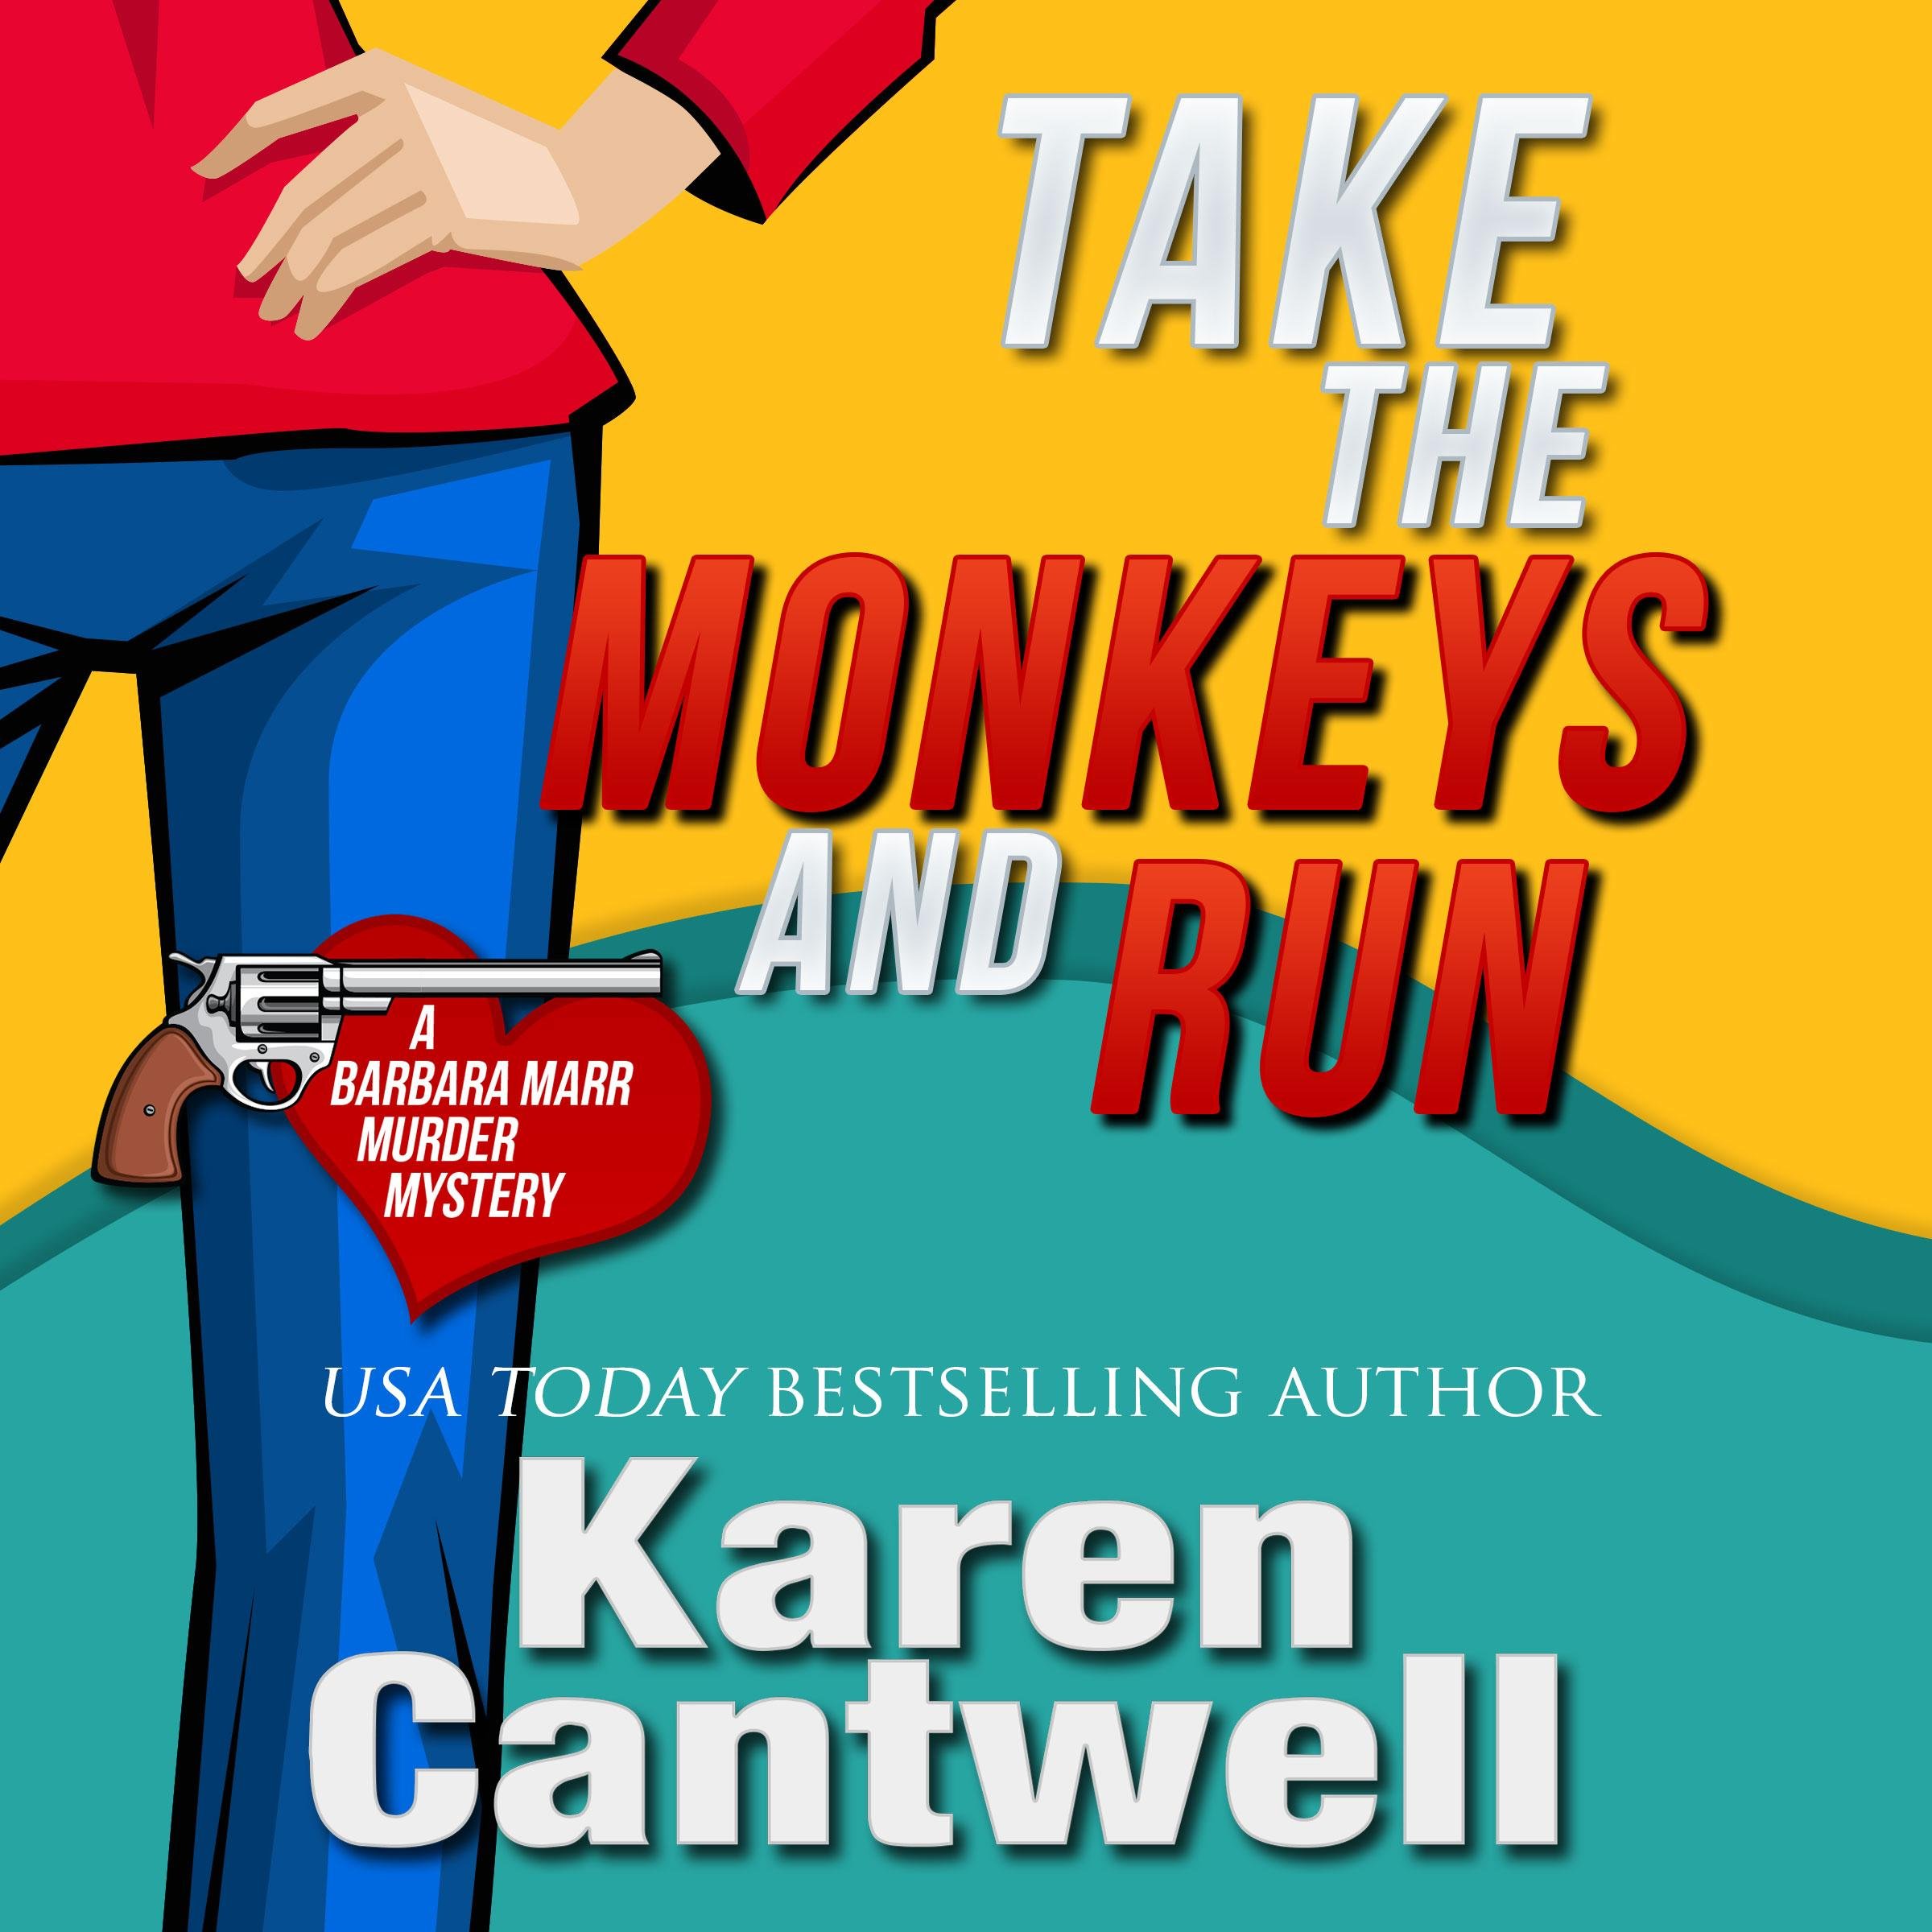 Karen Cantwell, writer. Author of Take the Monkeys and Run. Mother, wife, fan of laughing.